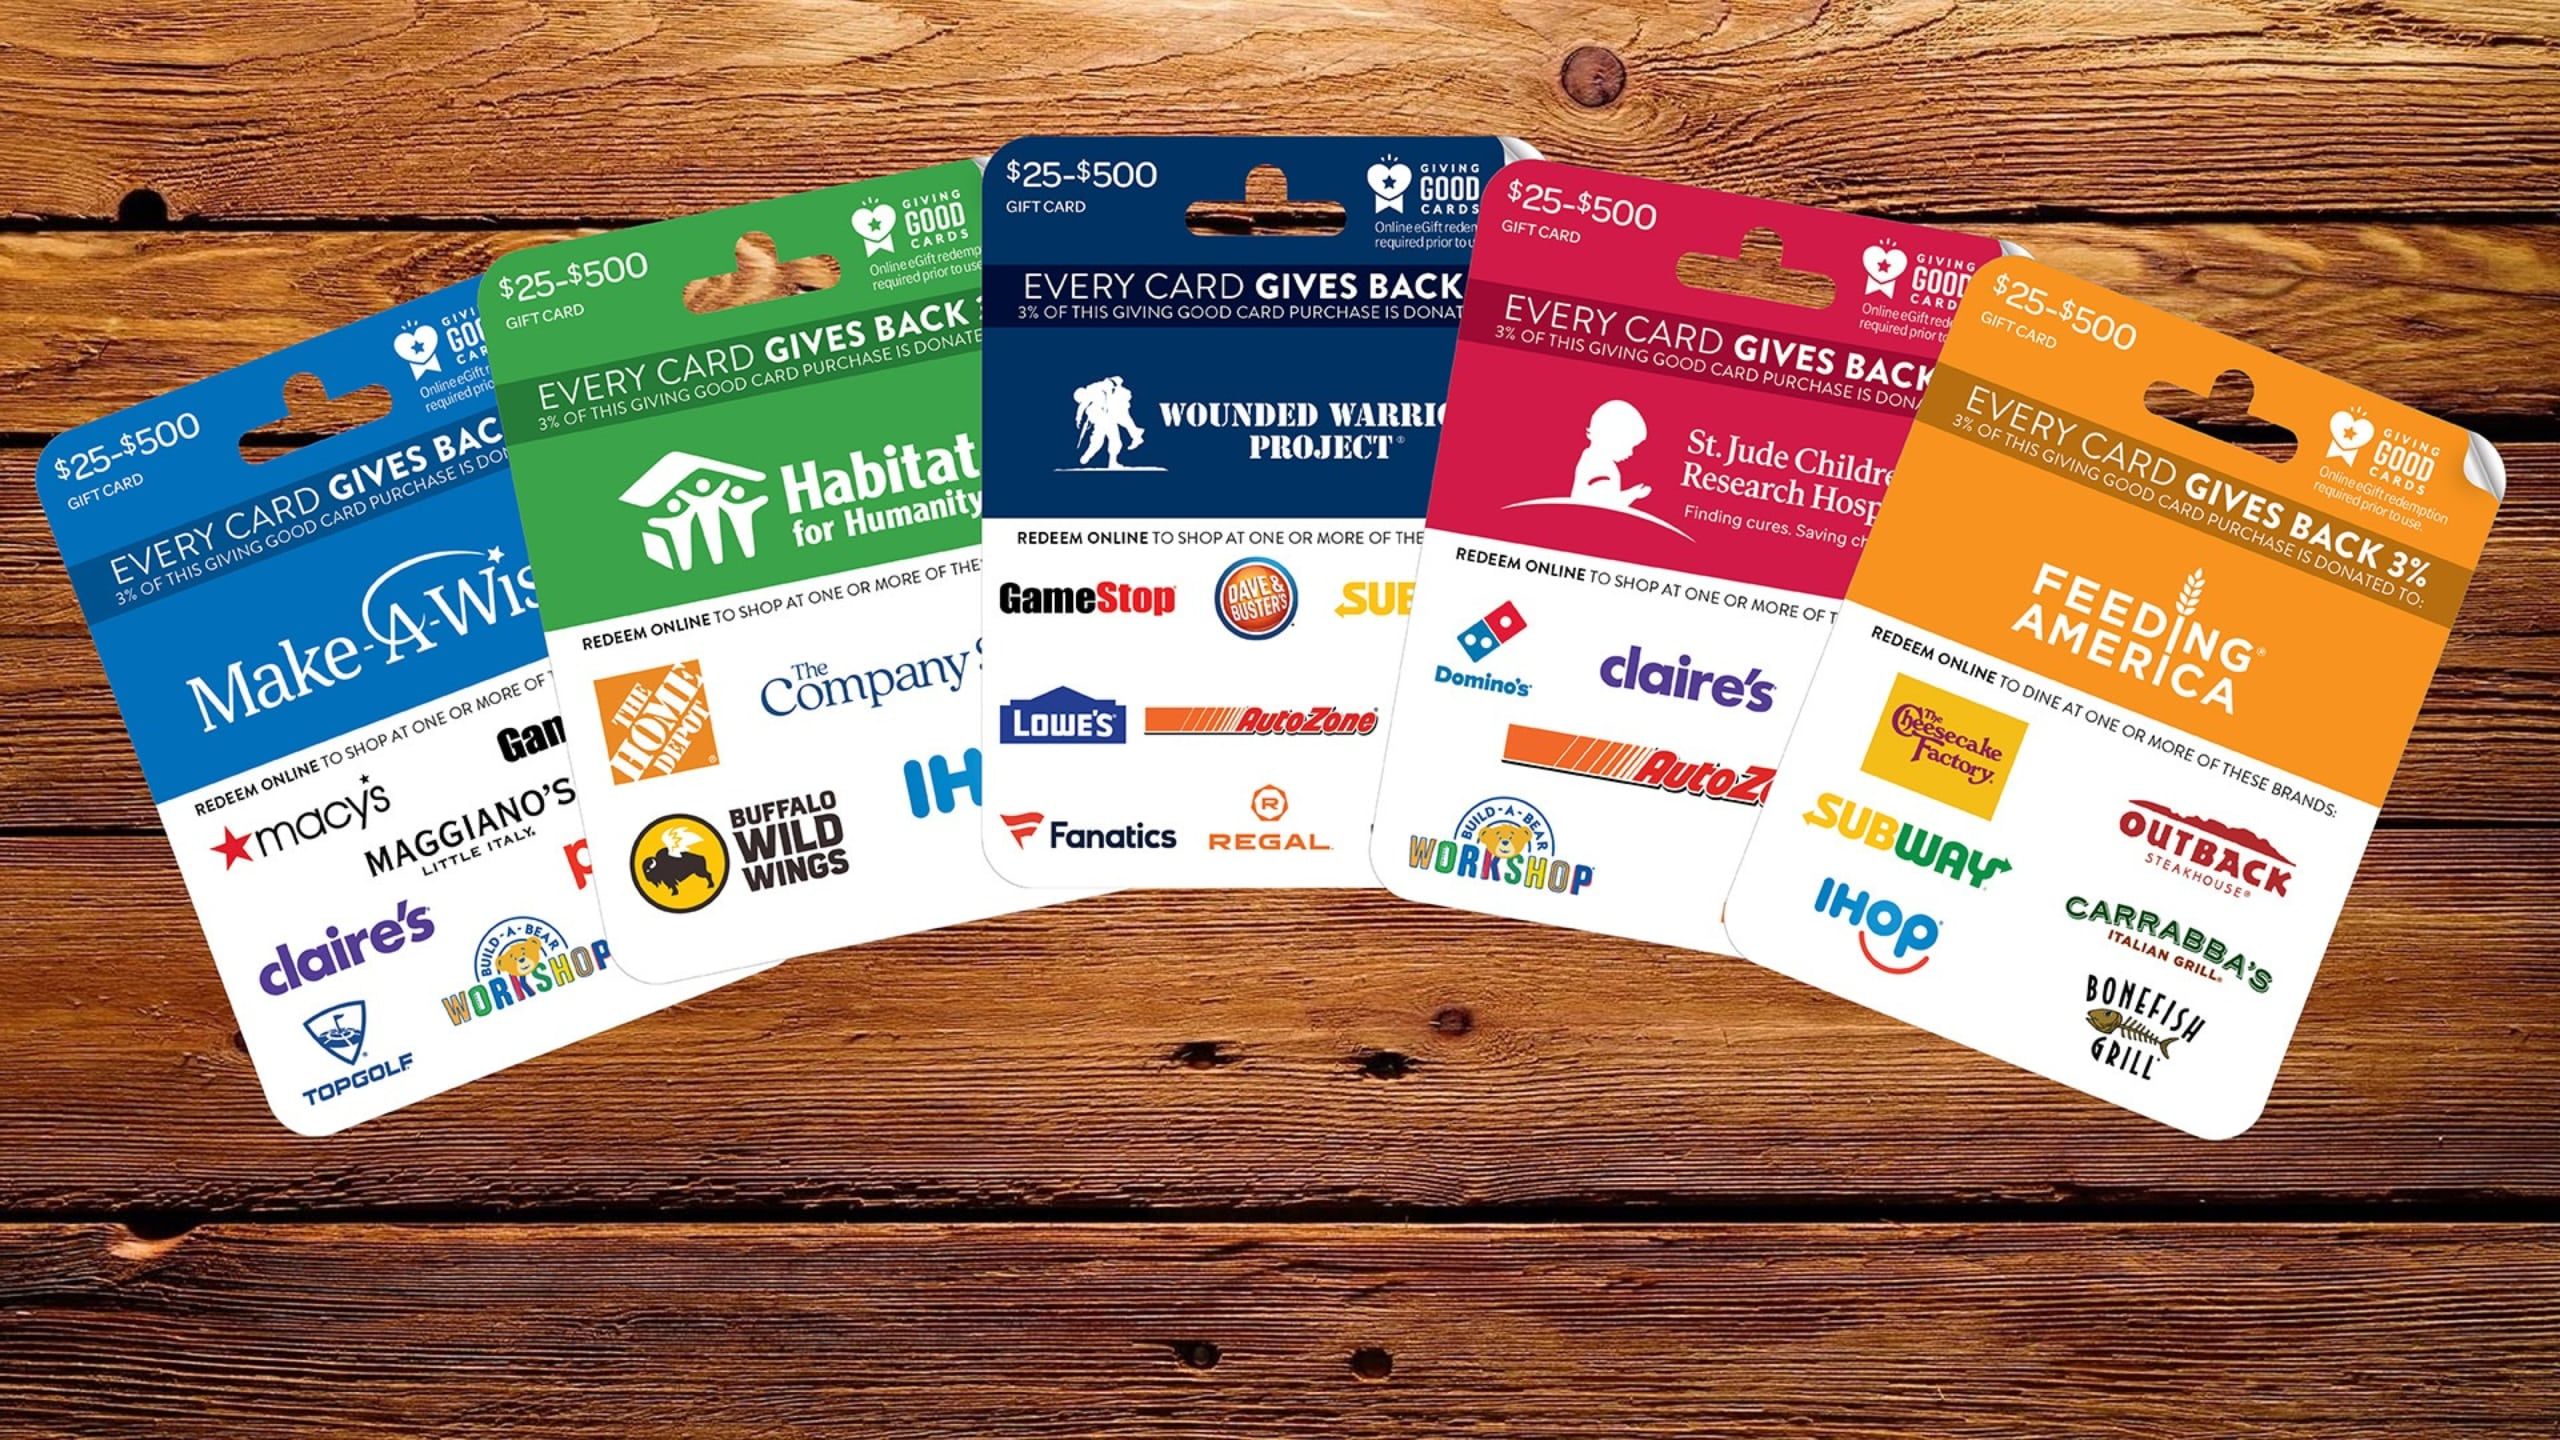 corporate gift cards from different brands for Employee Gift Card Programs